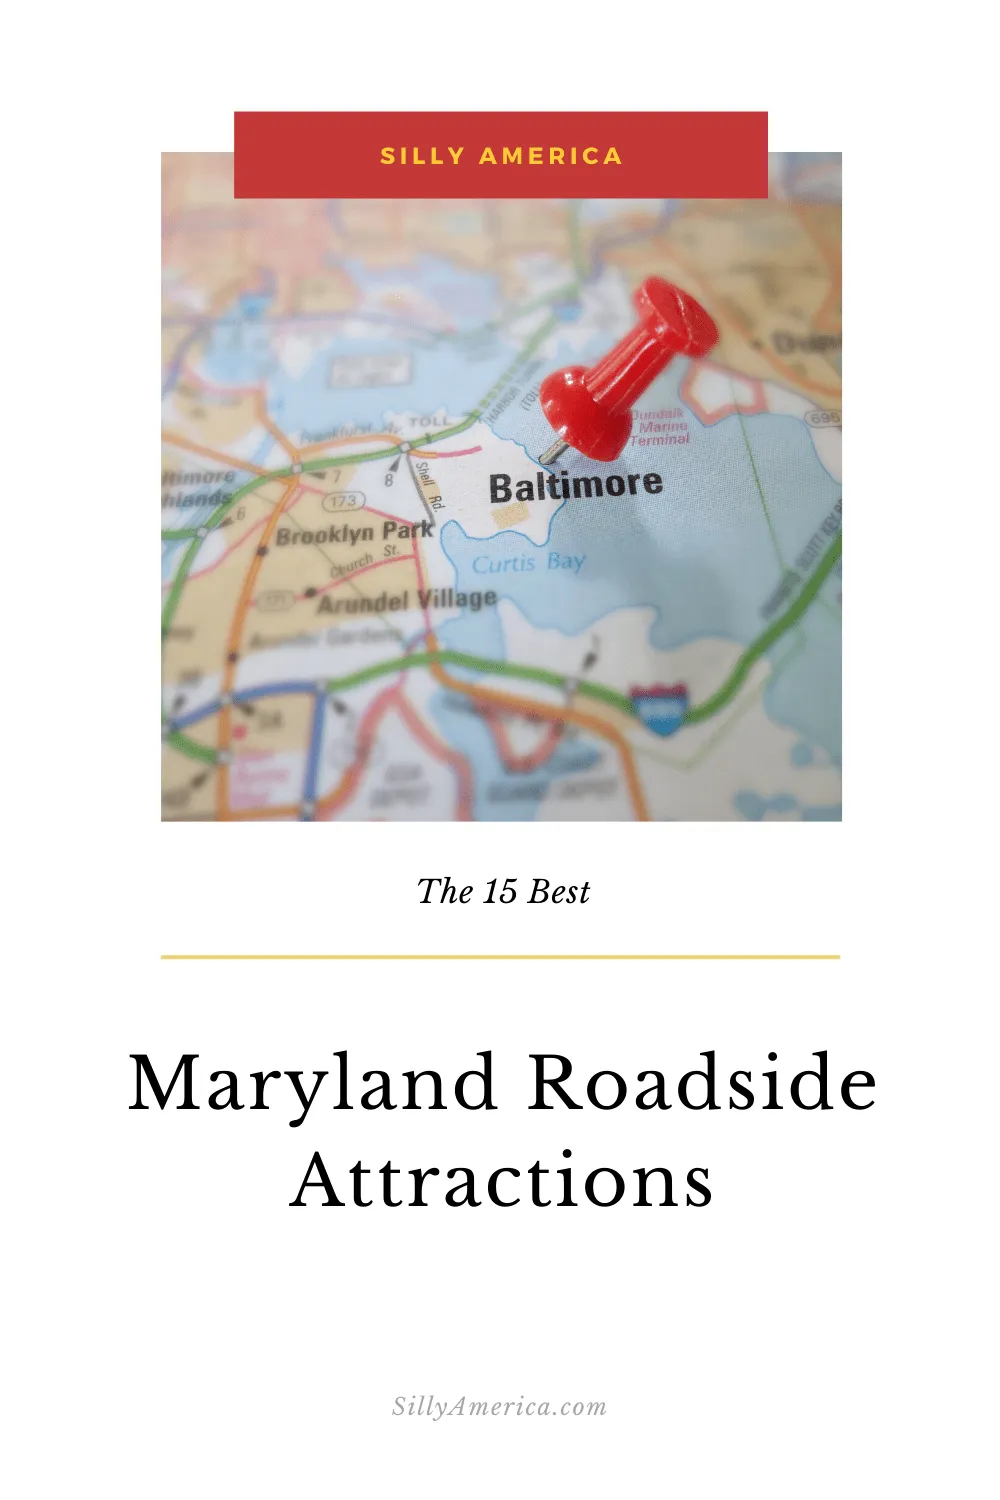 The best Maryland roadside attractions to visit on a Maryland road trip. Add these roadside oddities to your travel bucket list, itinerary, or route map! Fun road trip stops for kids or adults. #MarylandRoadsideAttractions #MarylandRoadsideAttraction #RoadsideAttractions #RoadsideAttraction #RoadTrip #MarylandRoadTrip #MarylandBucketListRoadTrip #MarylandBucketList #ThingsToDoInMaryland